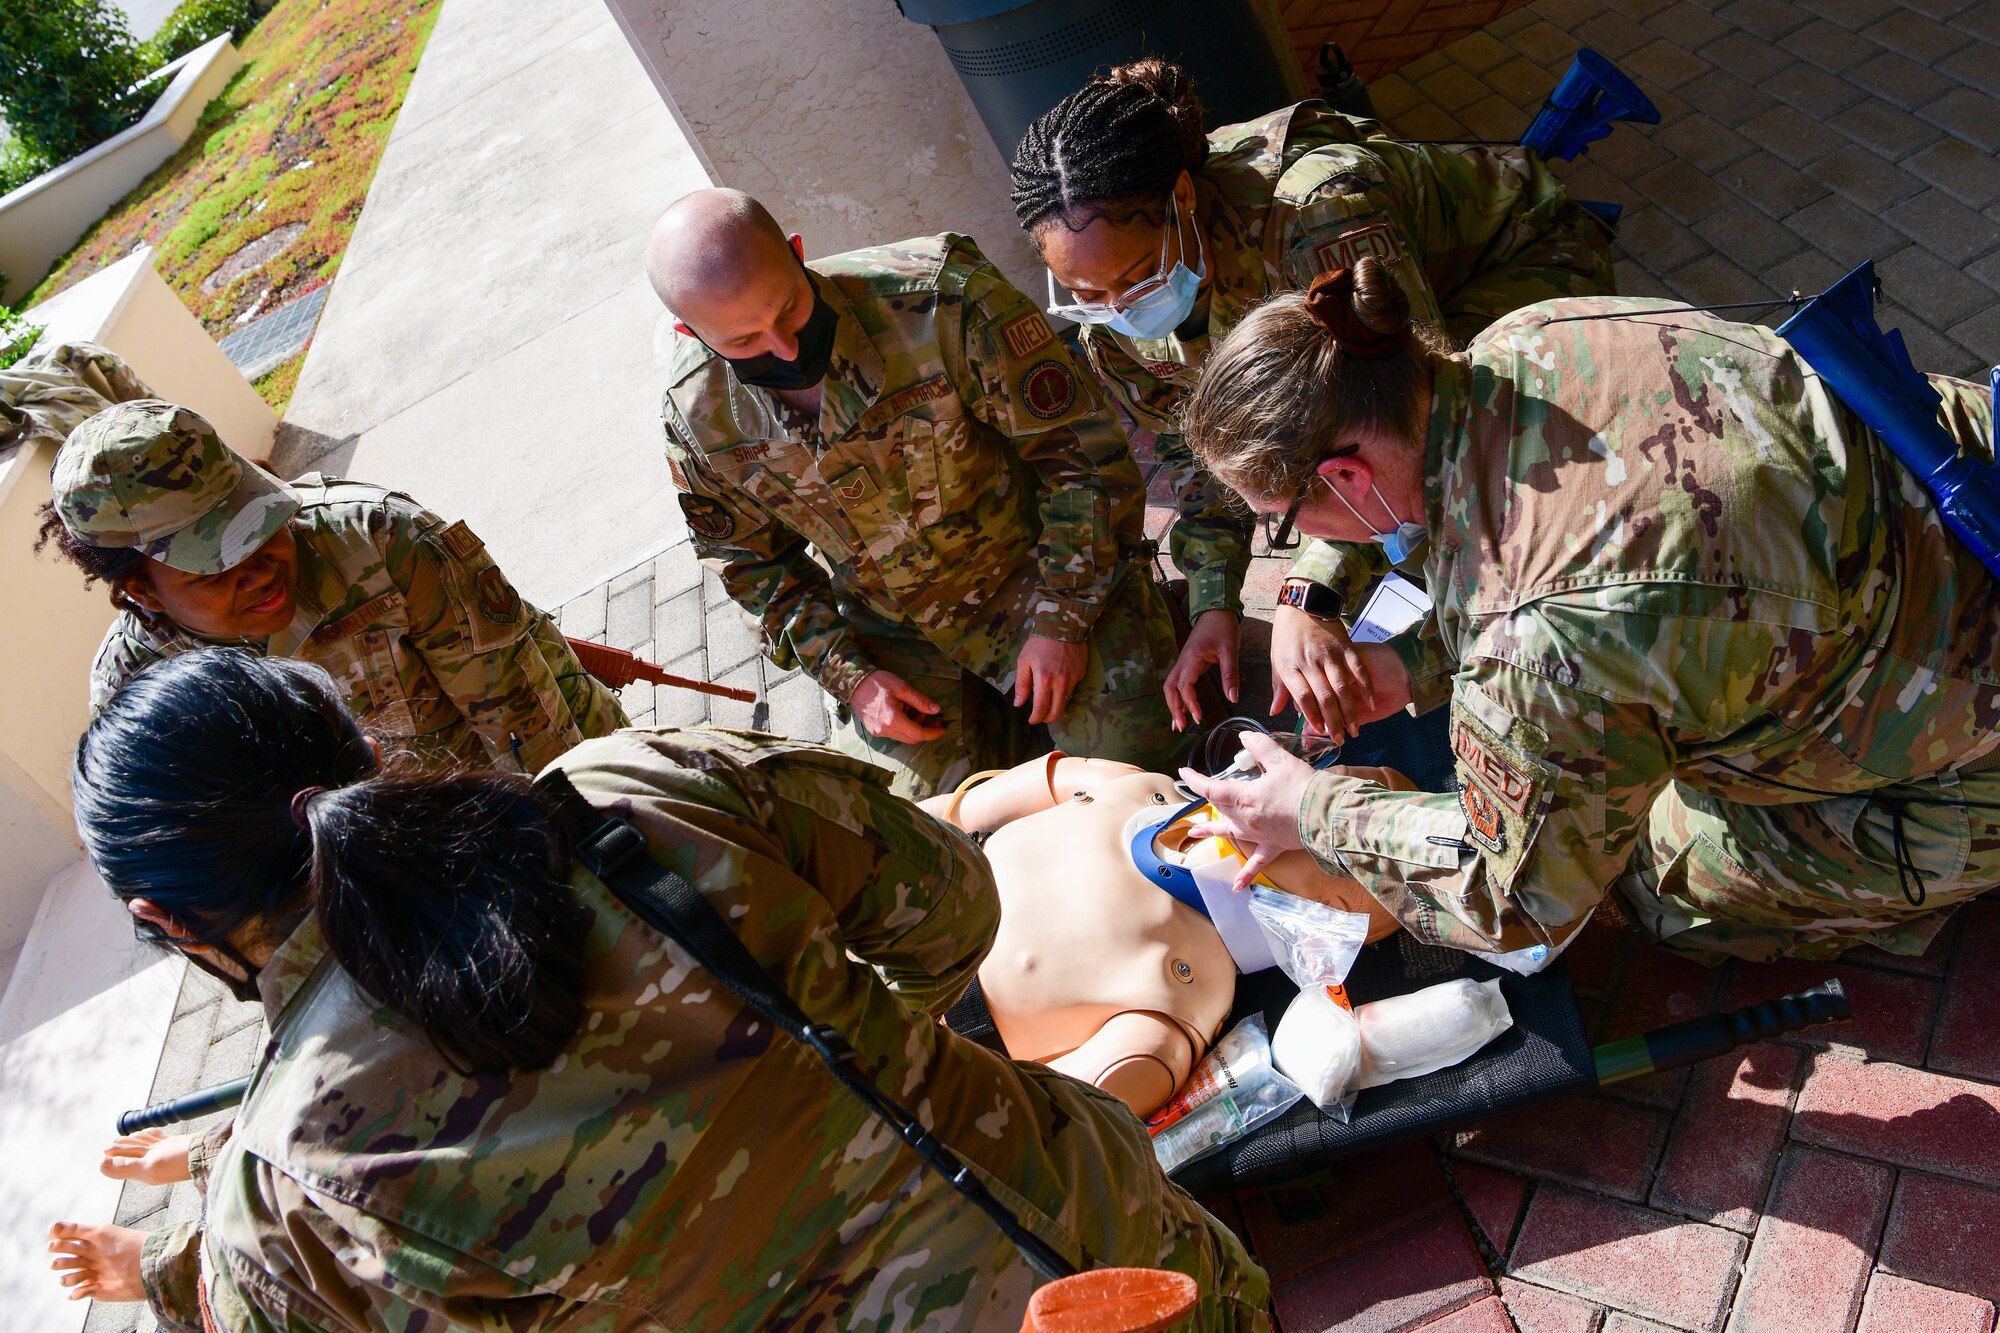 U.S. Air Force Airmen from the 31st Medical Group ‘treat’ a medical mannequin for simulated wounds during a ‘trauma care under fire’ training at Aviano Air Base, Italy, April 12, 2022. For the first time at Aviano AB, approximately 40 31st MDG  technicians conducted joint ‘trauma care under fire’ training with the 31st SFS Military Working Dog K-9 unit. (U.S. Air Force photo by Senior Airman Brooke Moeder)